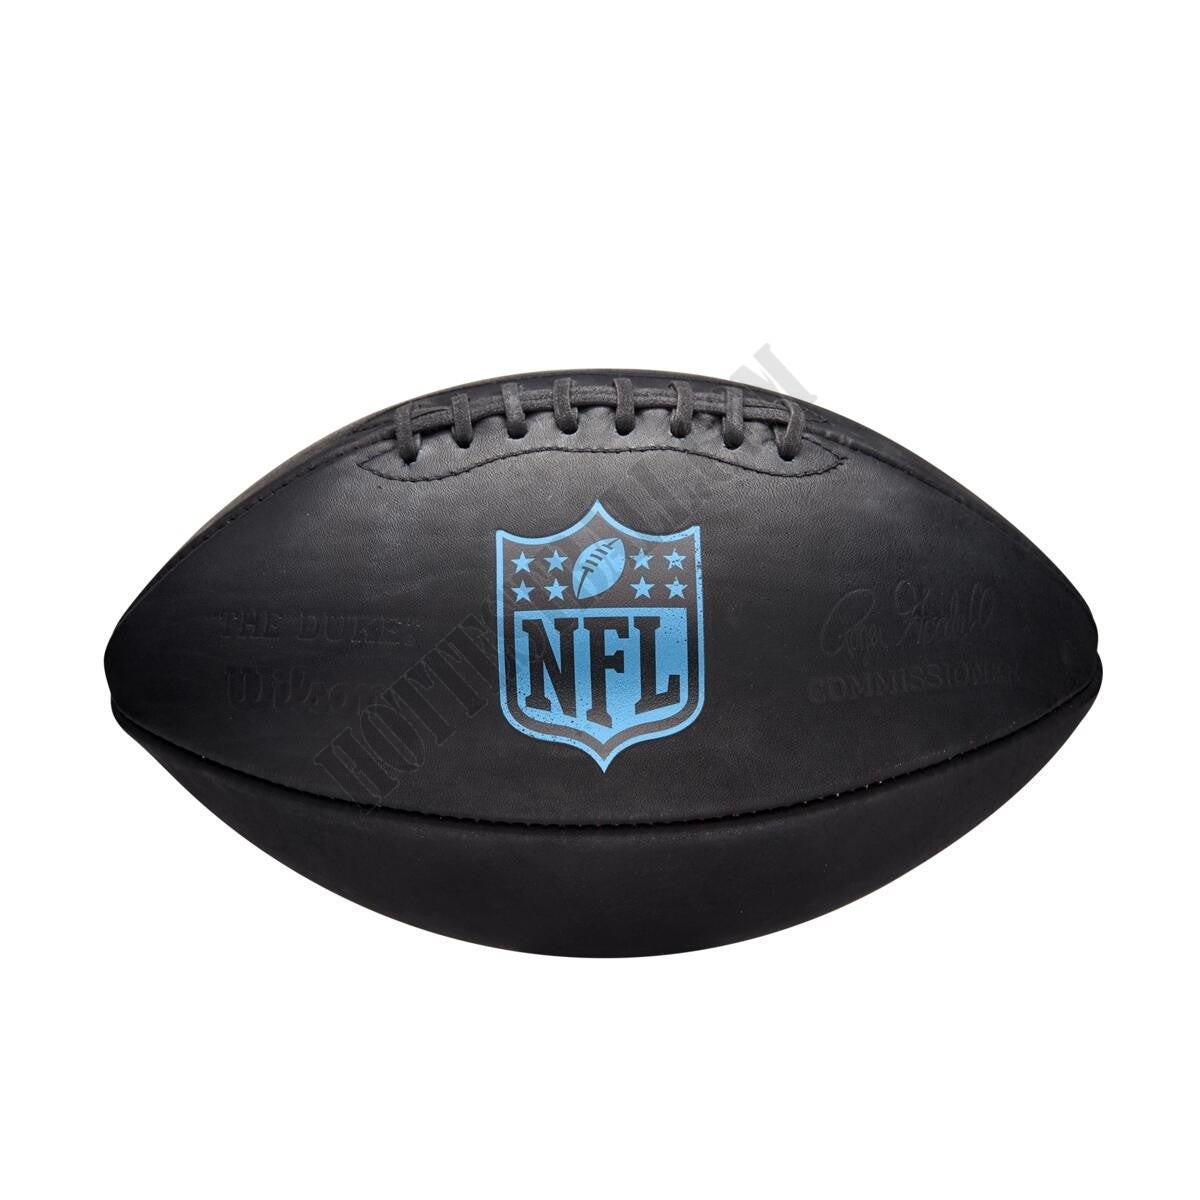 The Duke NFL Football Limited Black Edition - Wilson Discount Store - -0